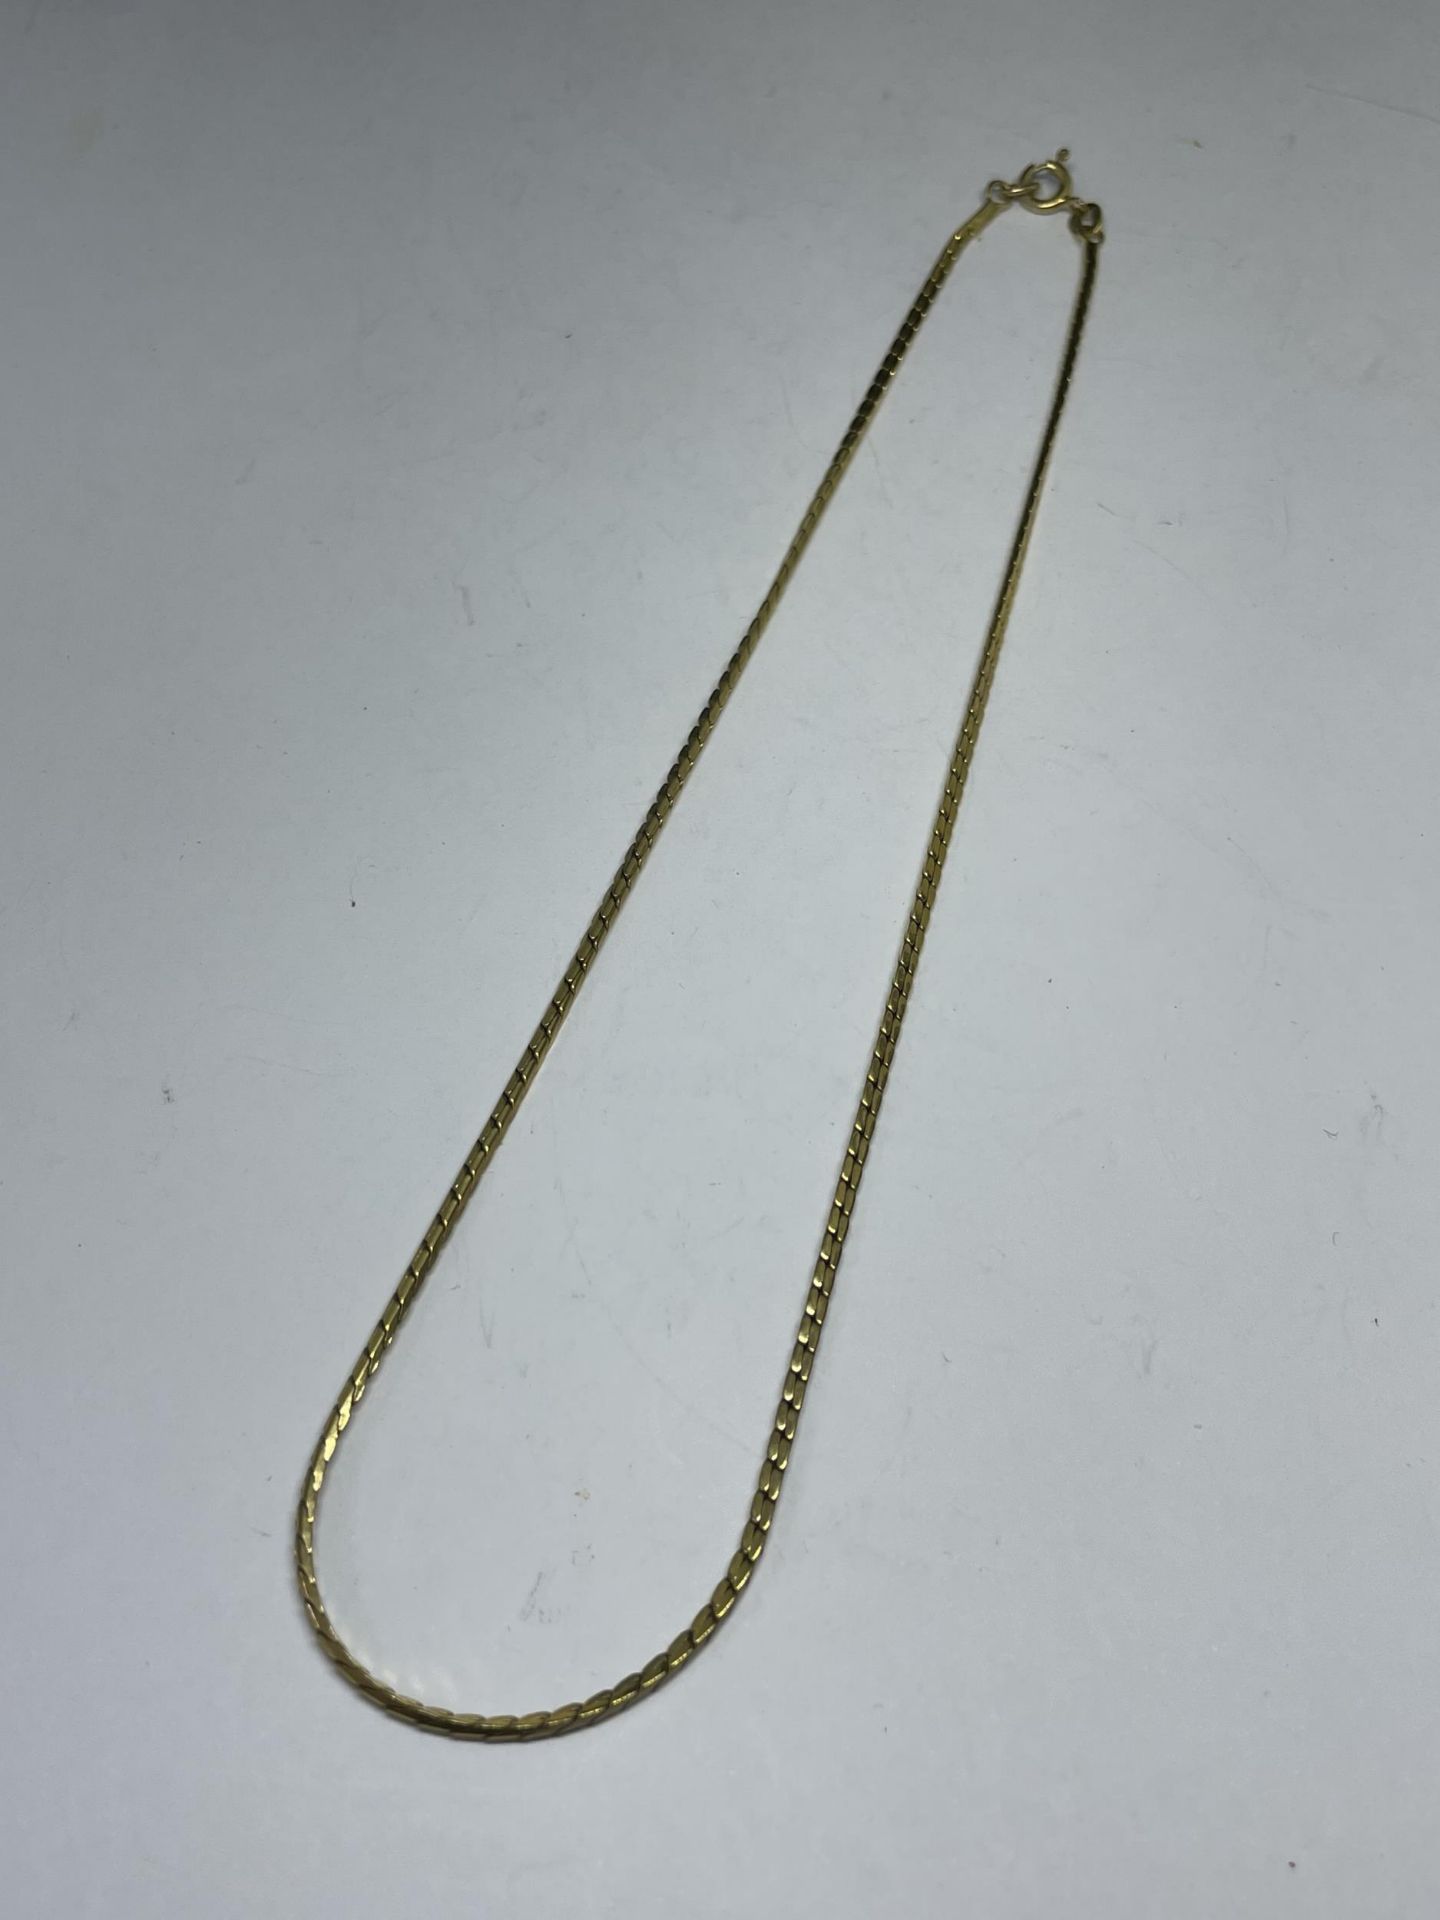 A 9 CARAT GOLD NECKLACE GROSS WEIGHT 7.12 GRAMS IN A PRESENTATION BOX